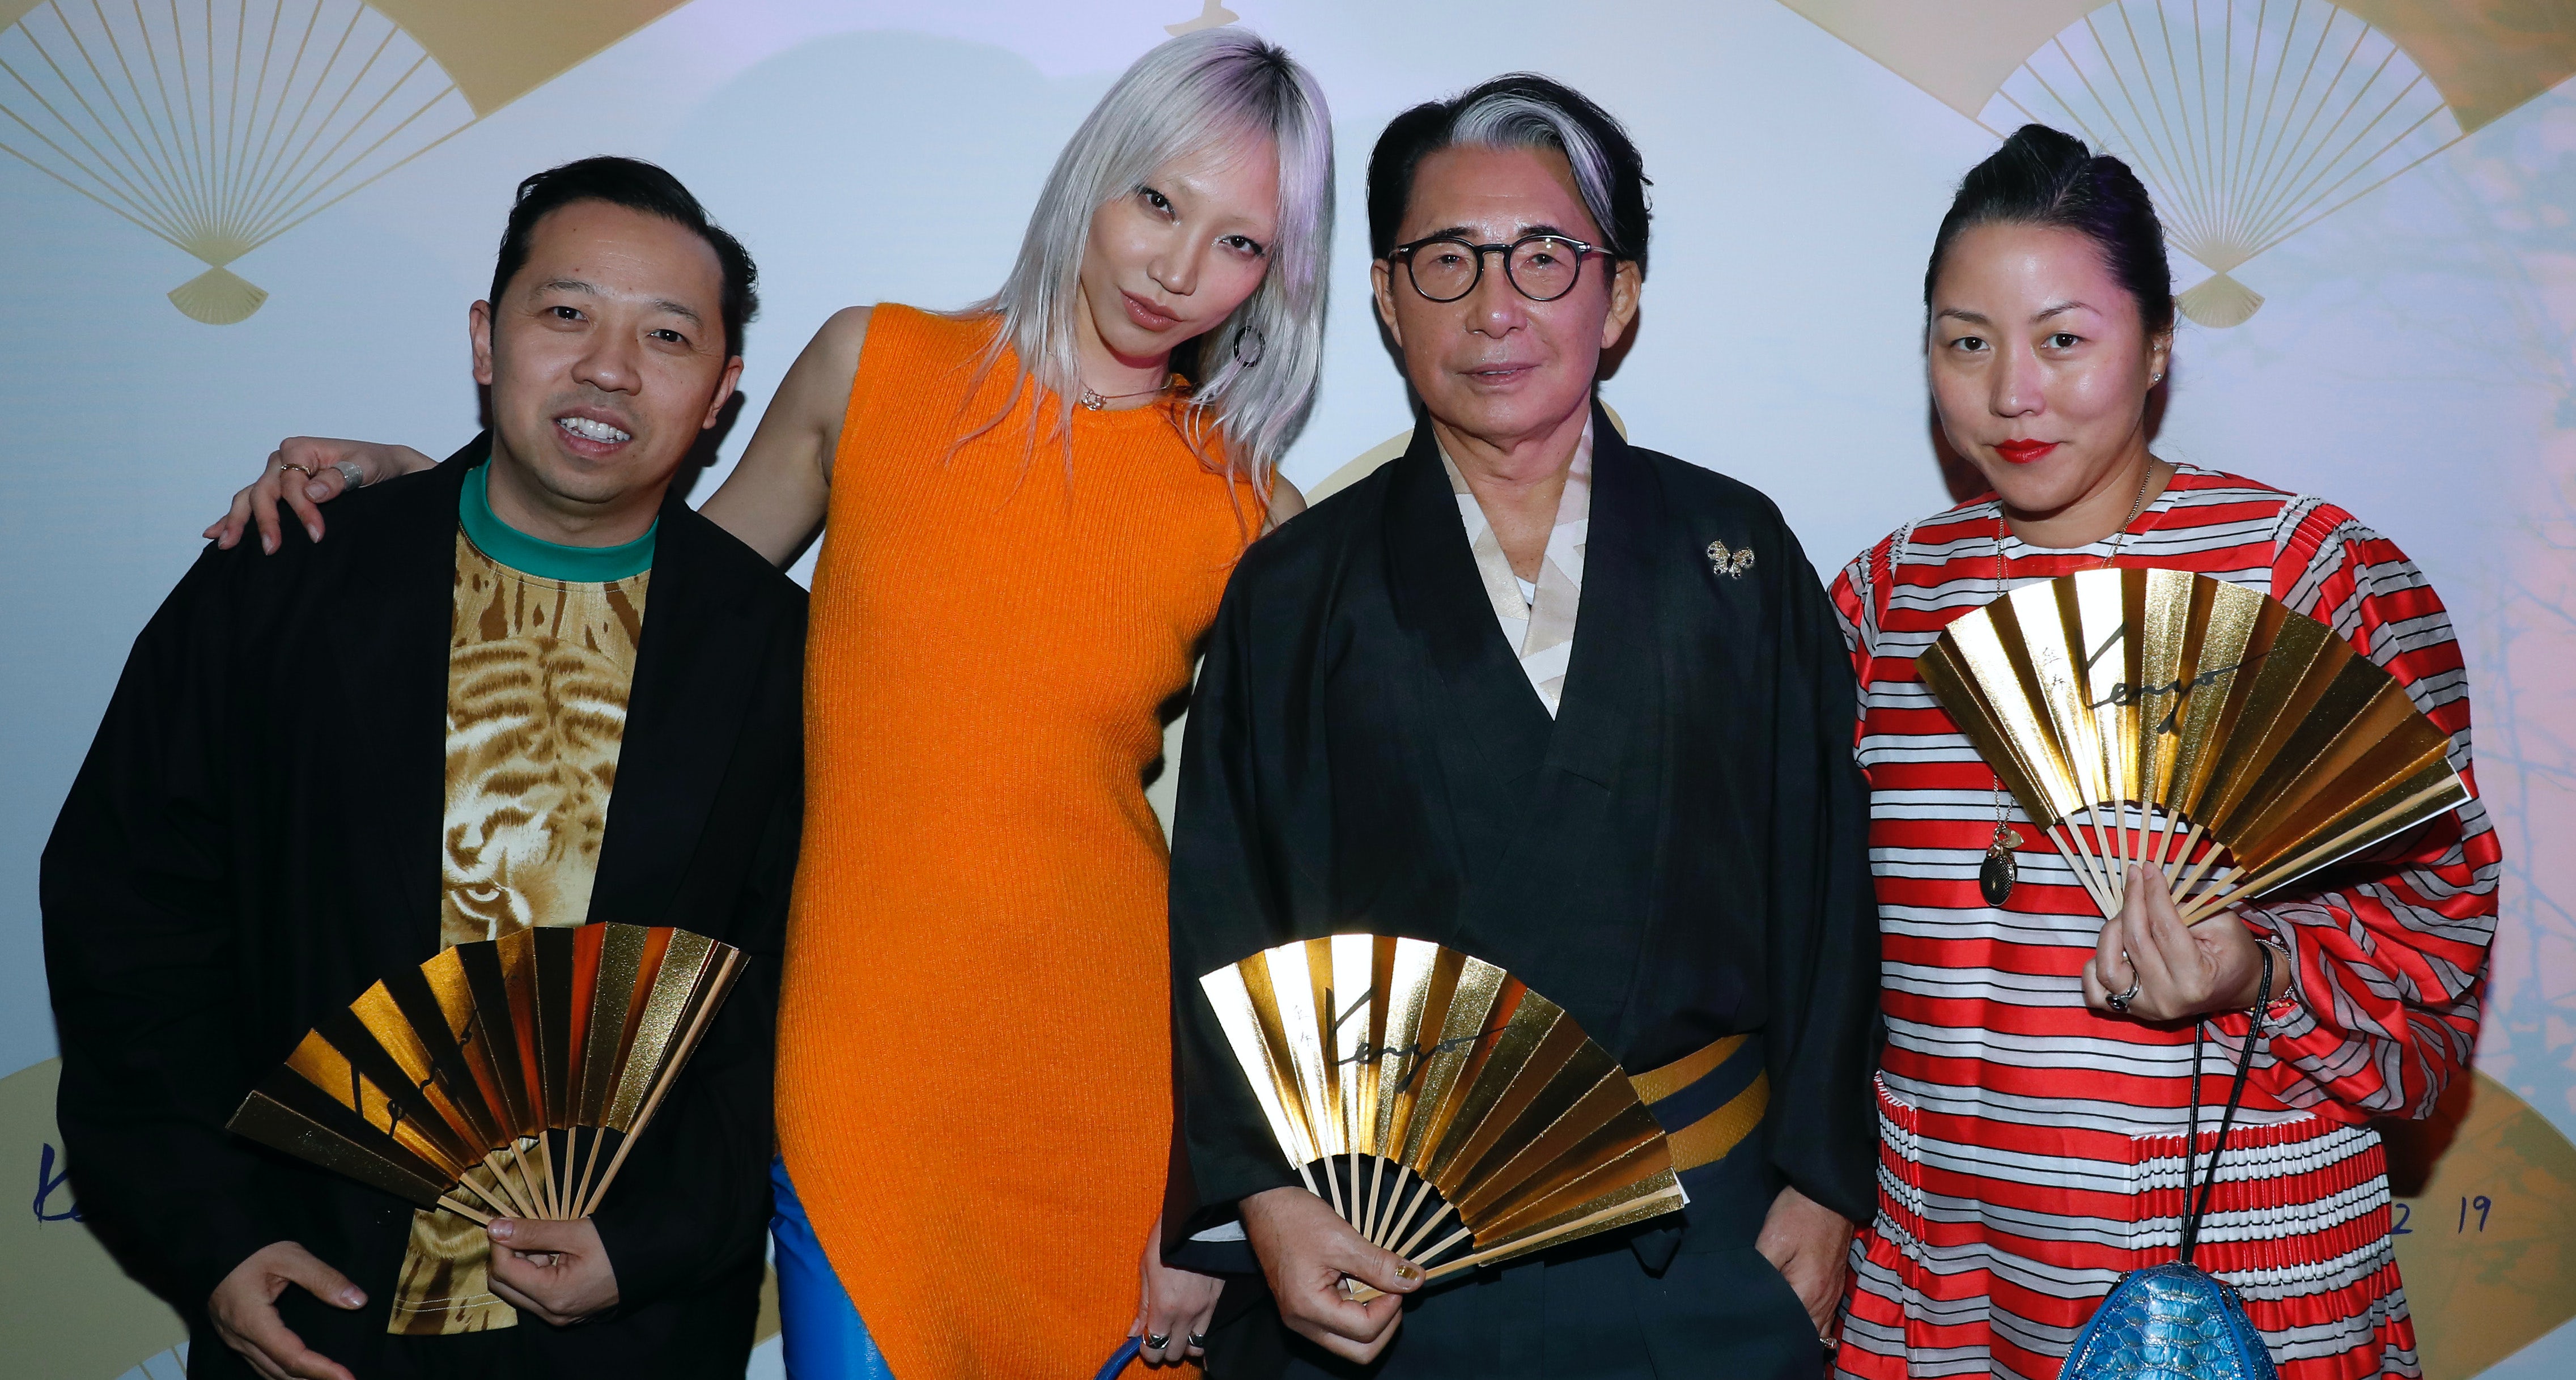 Kenzo: How Carol Lim and Humberto Leon Are Setting The Mark for LVMH Brands